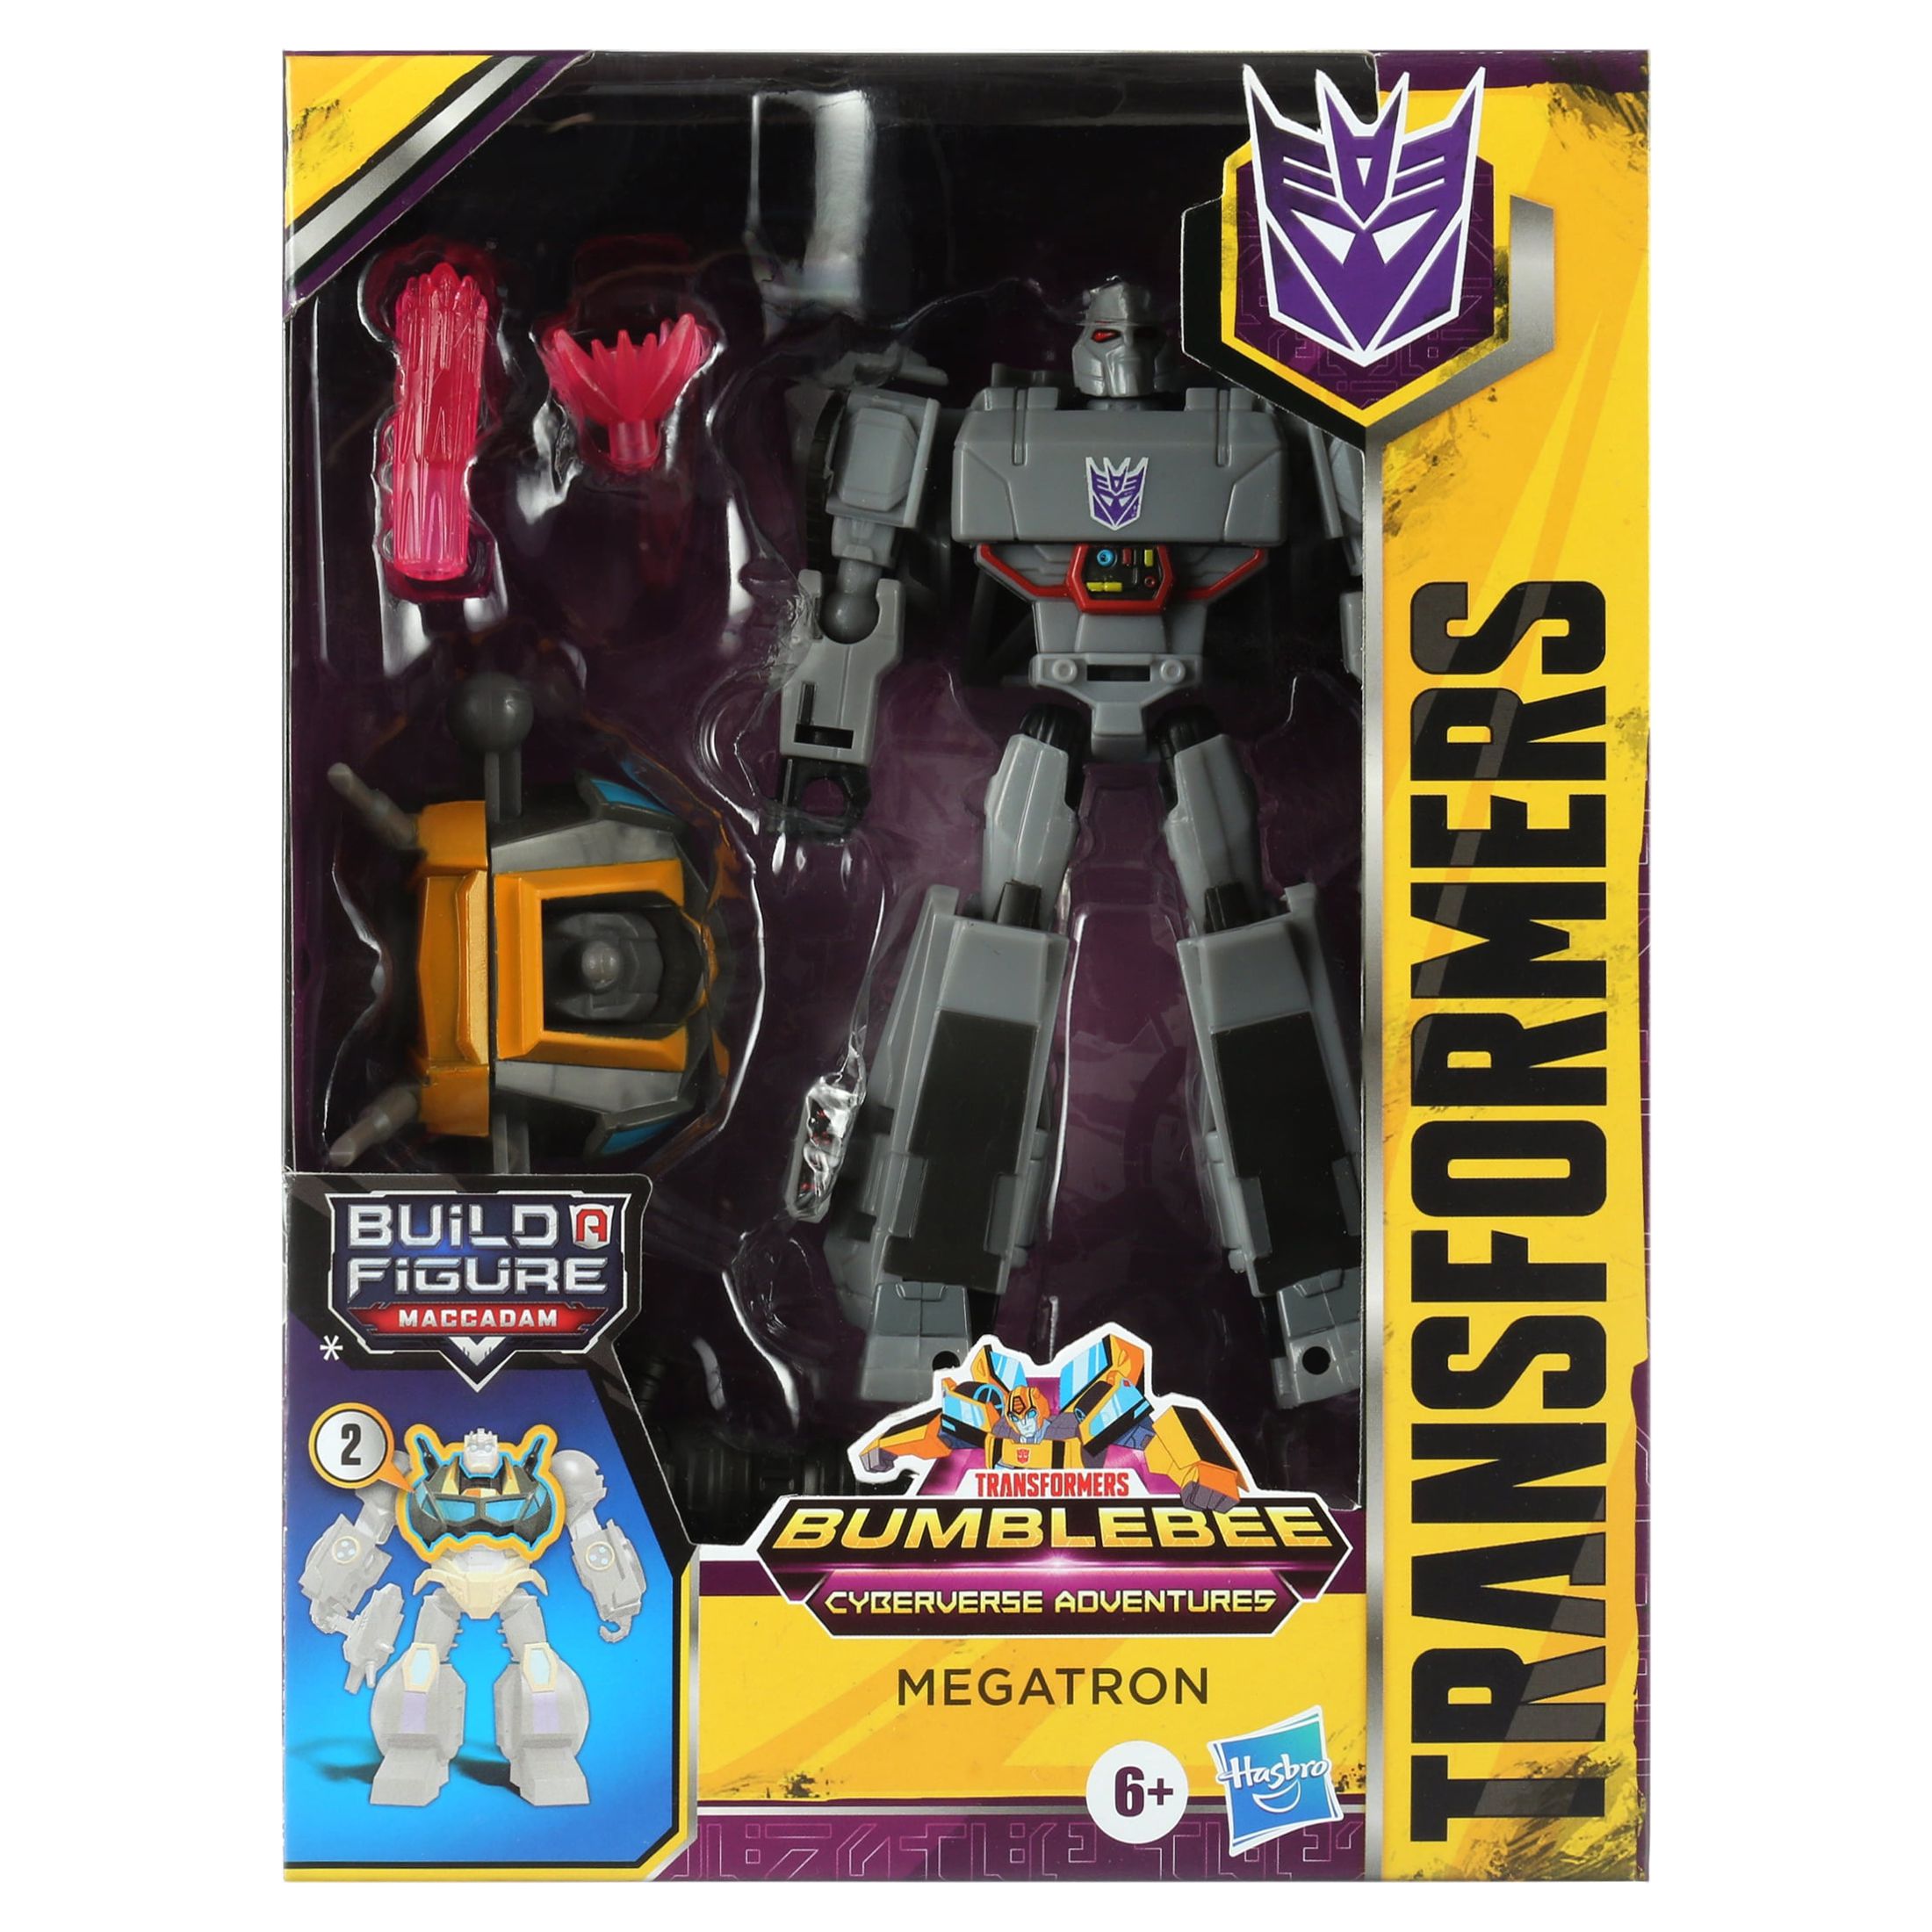 Transformers: Bumblebee Cyberverse Adventures Megatron Kids Toy Action Figure for Boys and Girls (5") - image 1 of 8